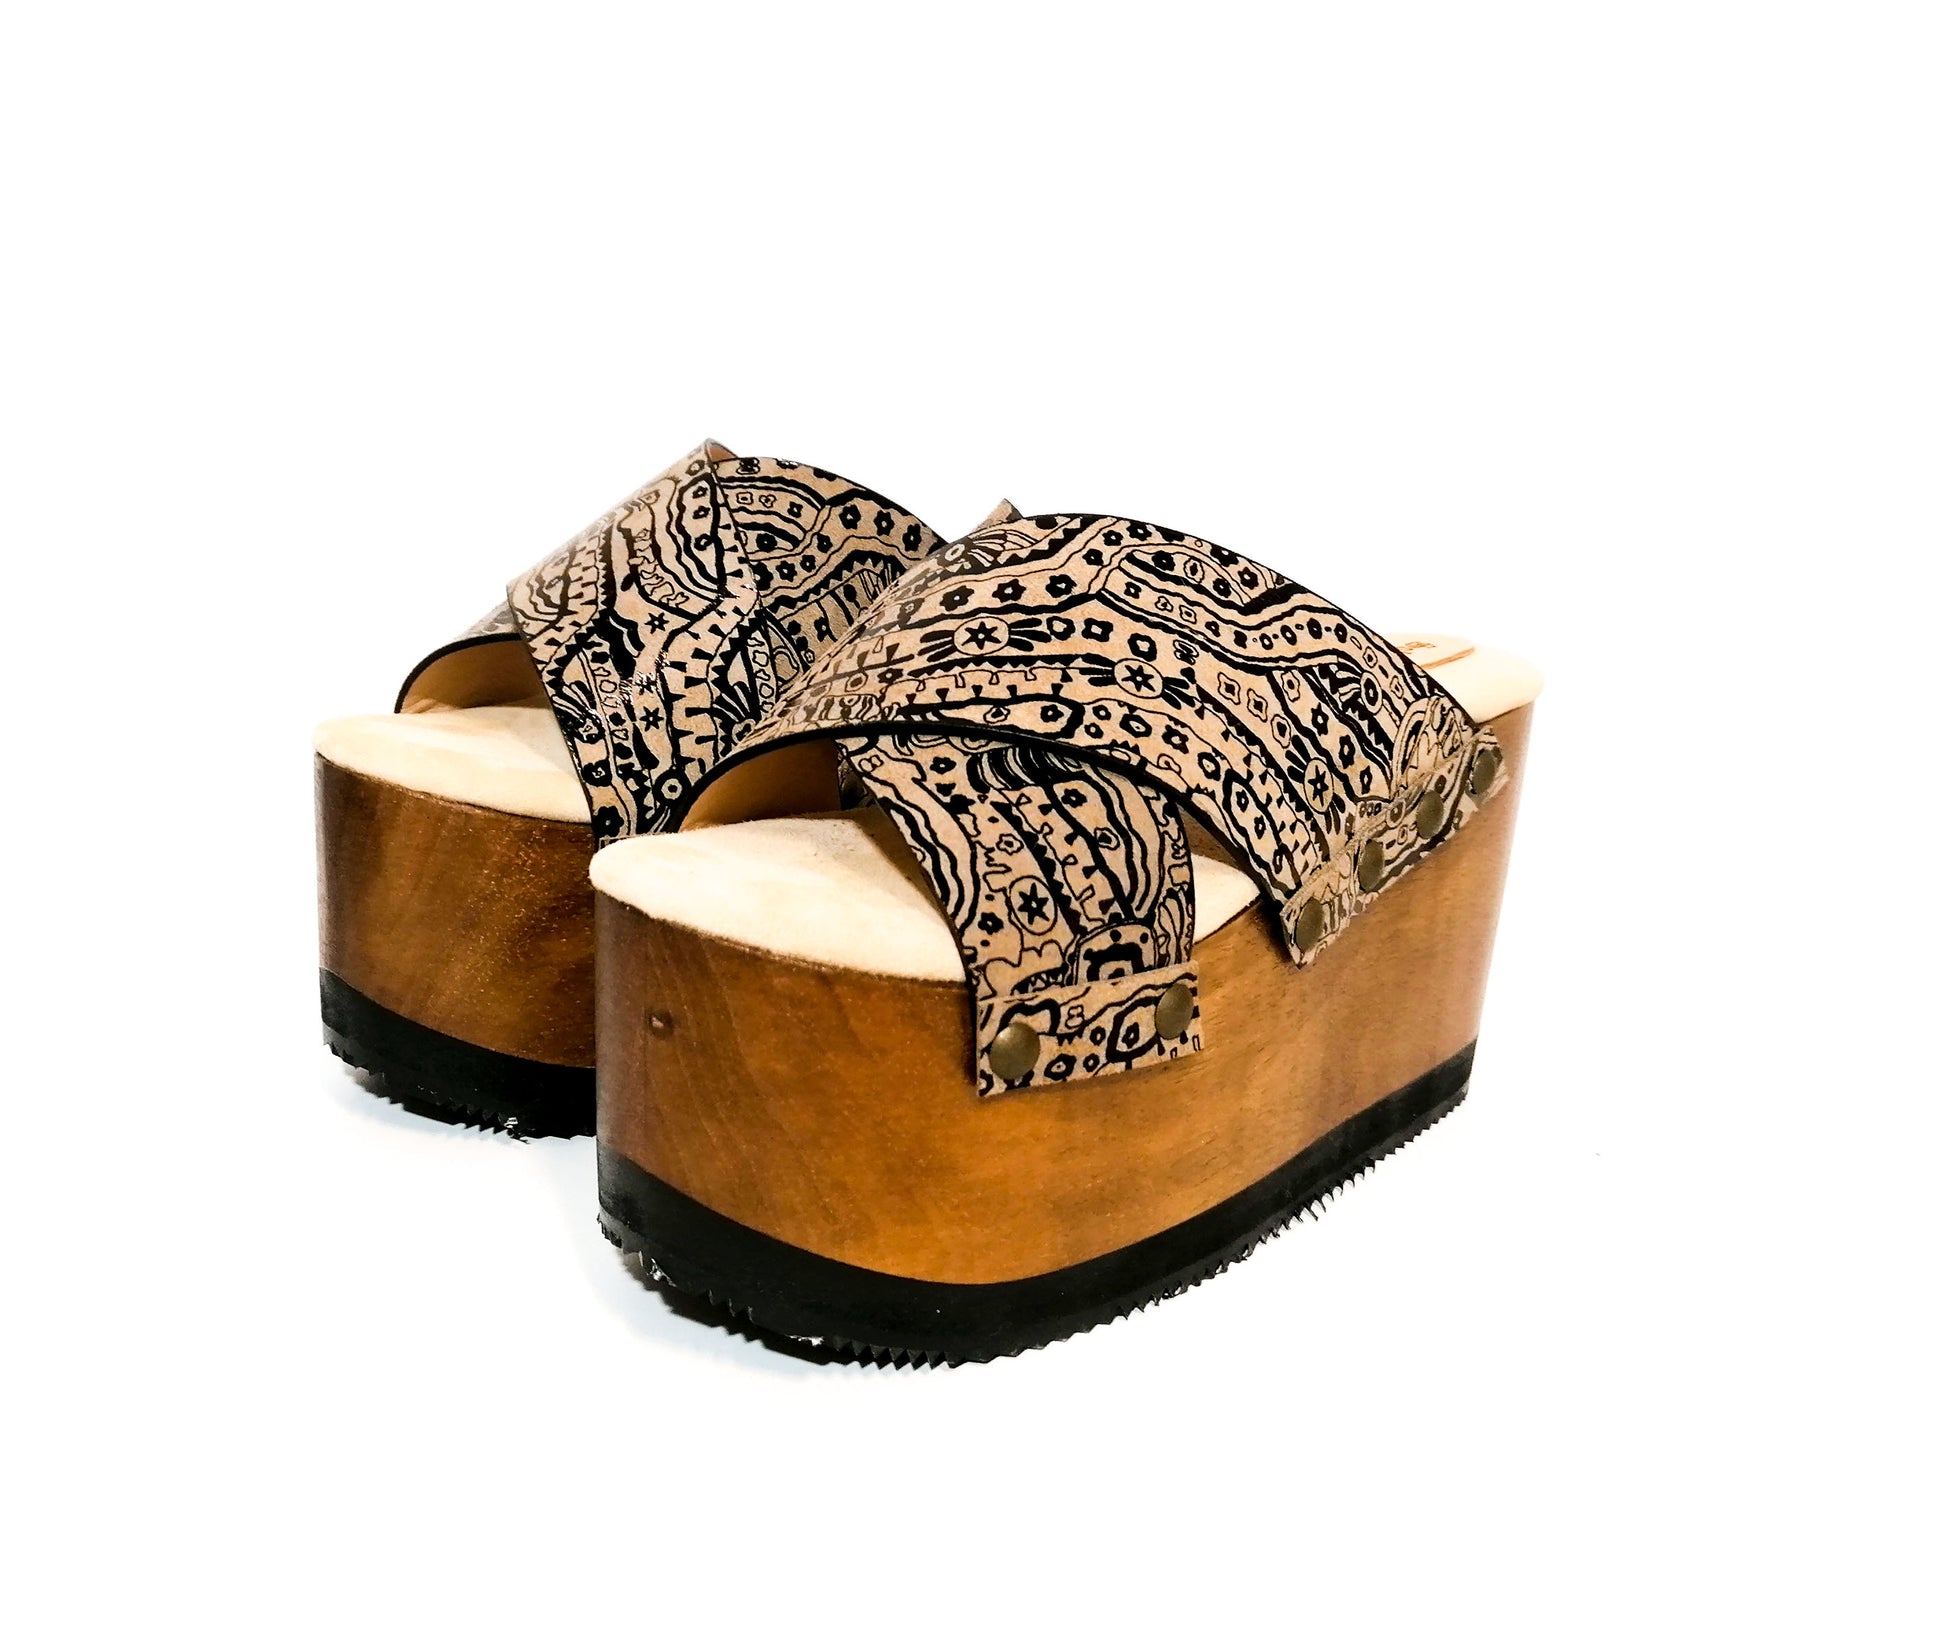 Ethnic leather platform clog sandal in vintage style. Vintage style wooden wedge sandal. Vintage style platform sandal 90's. Sizes from 34 to 47. Sizes 34 to 47. High quality leather shoes handmade by sol Caleyo. Sustainable fashion.